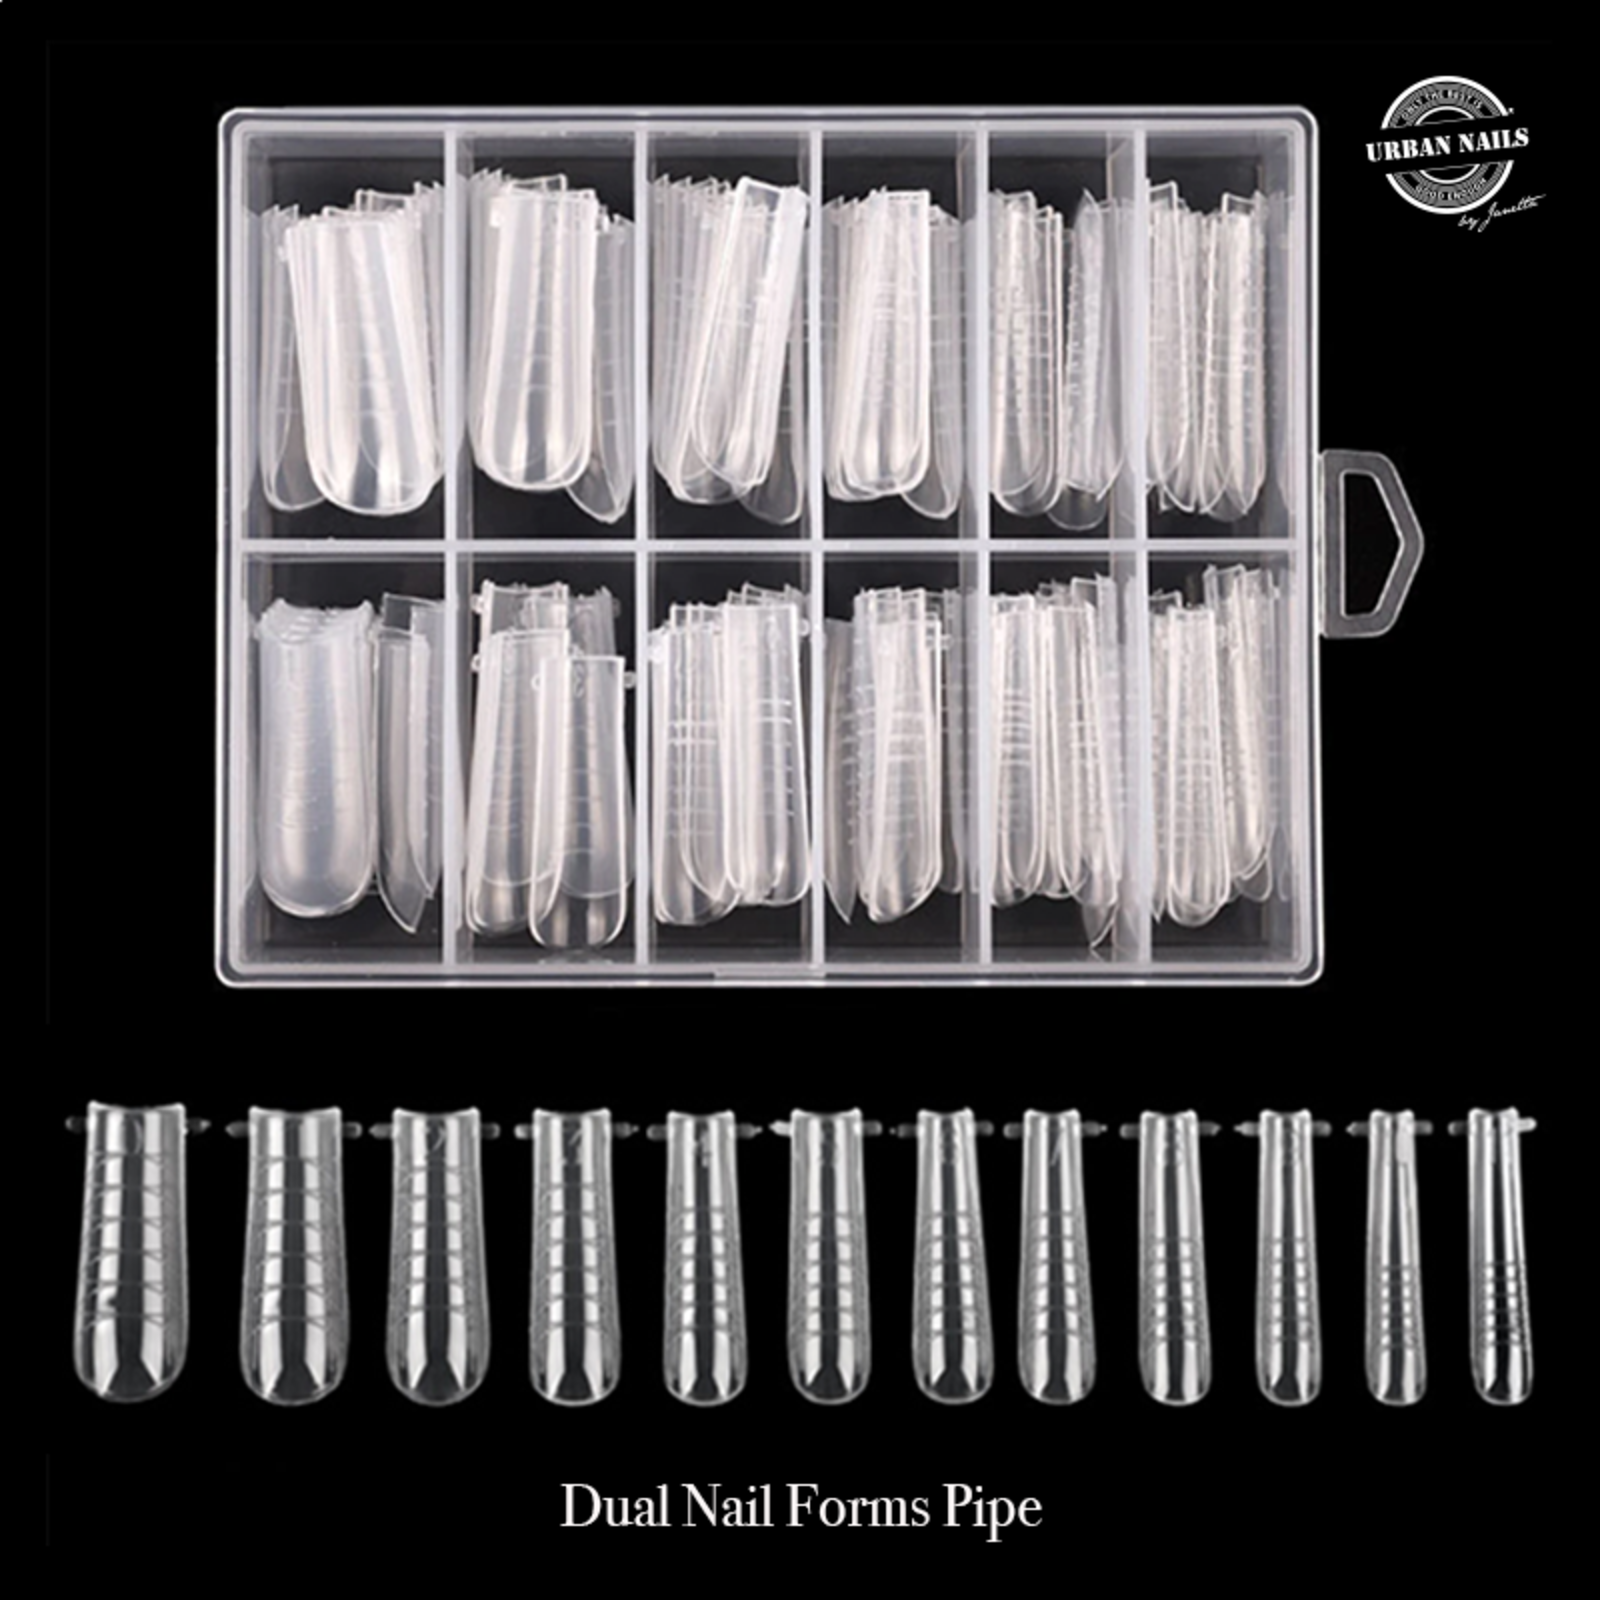 Urban nails Dual Forms Pipe